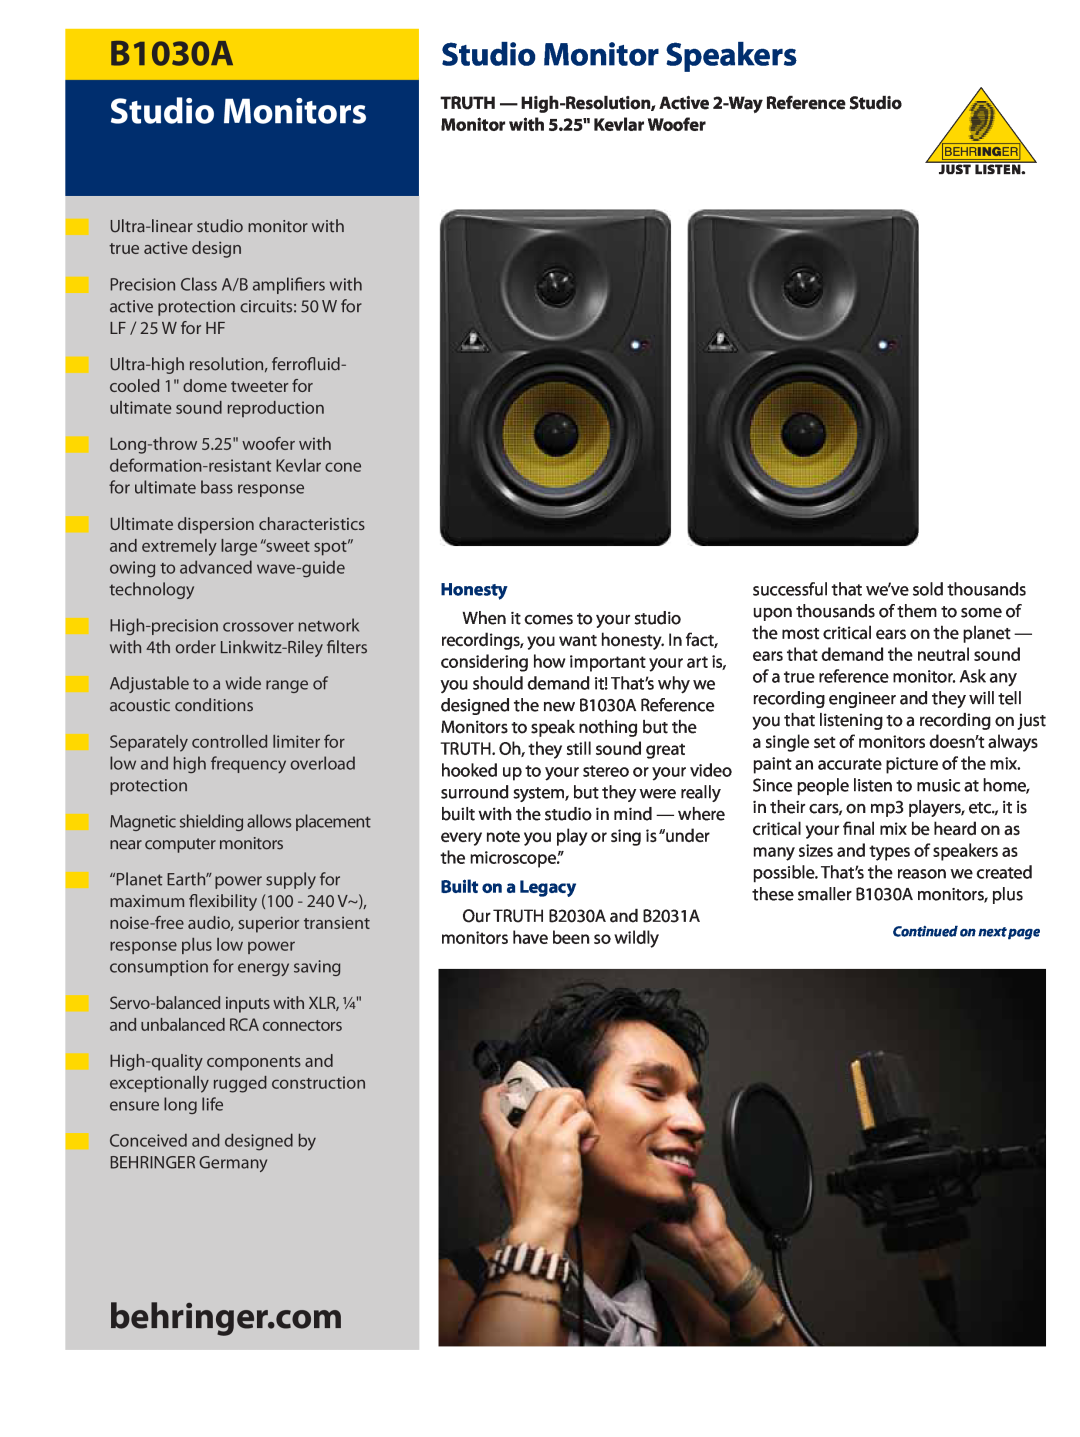 Behringer manual TRUTH B1030A, TRUTH - High-Resolution, Honesty, Built on a Legacy, Years of R’n’D, Studio Monitors 